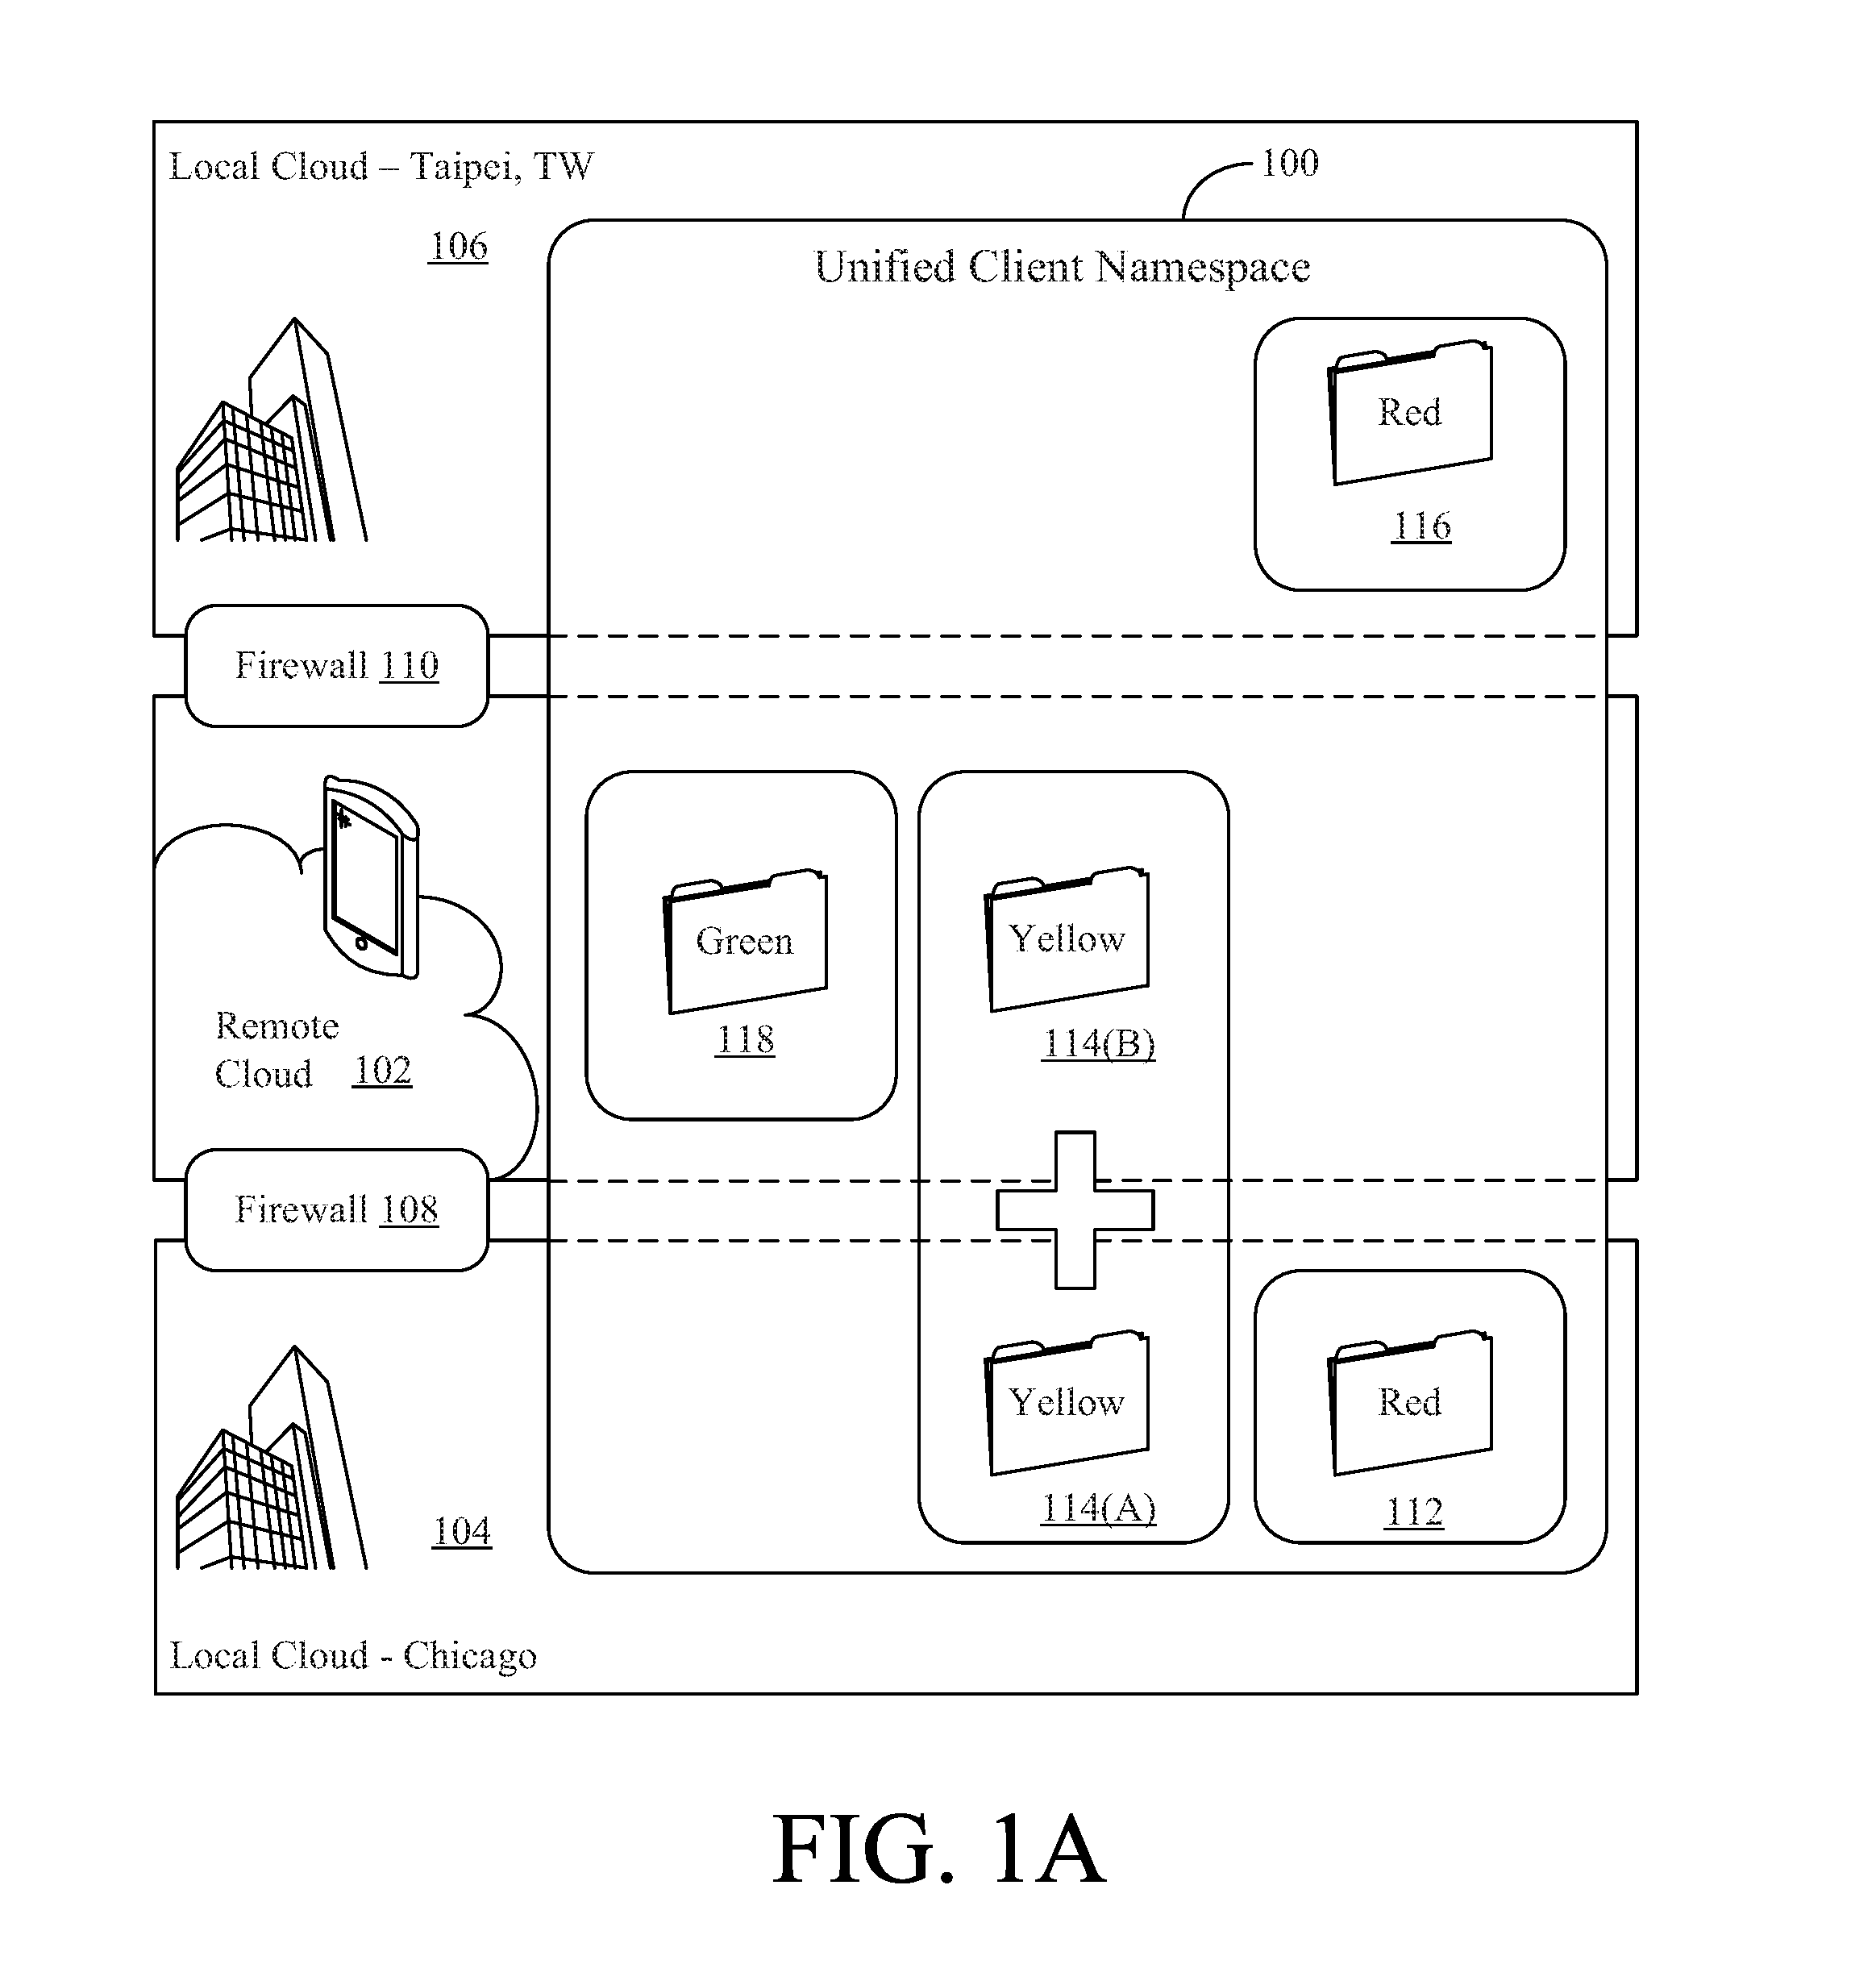 Systems and Methods for Facilitating Access to Private Files Using a Cloud Storage System